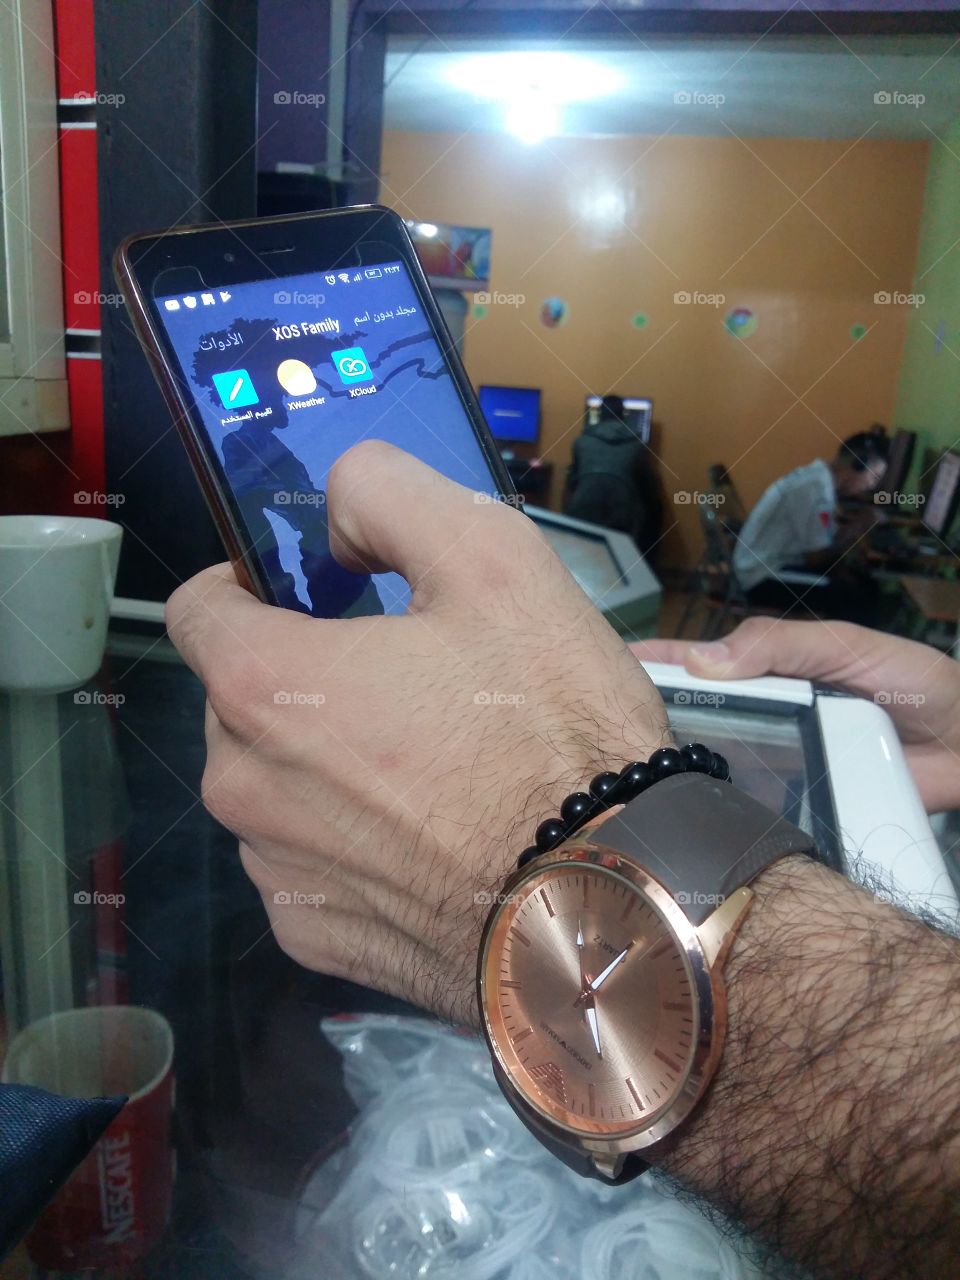 Wristwatch  and phone